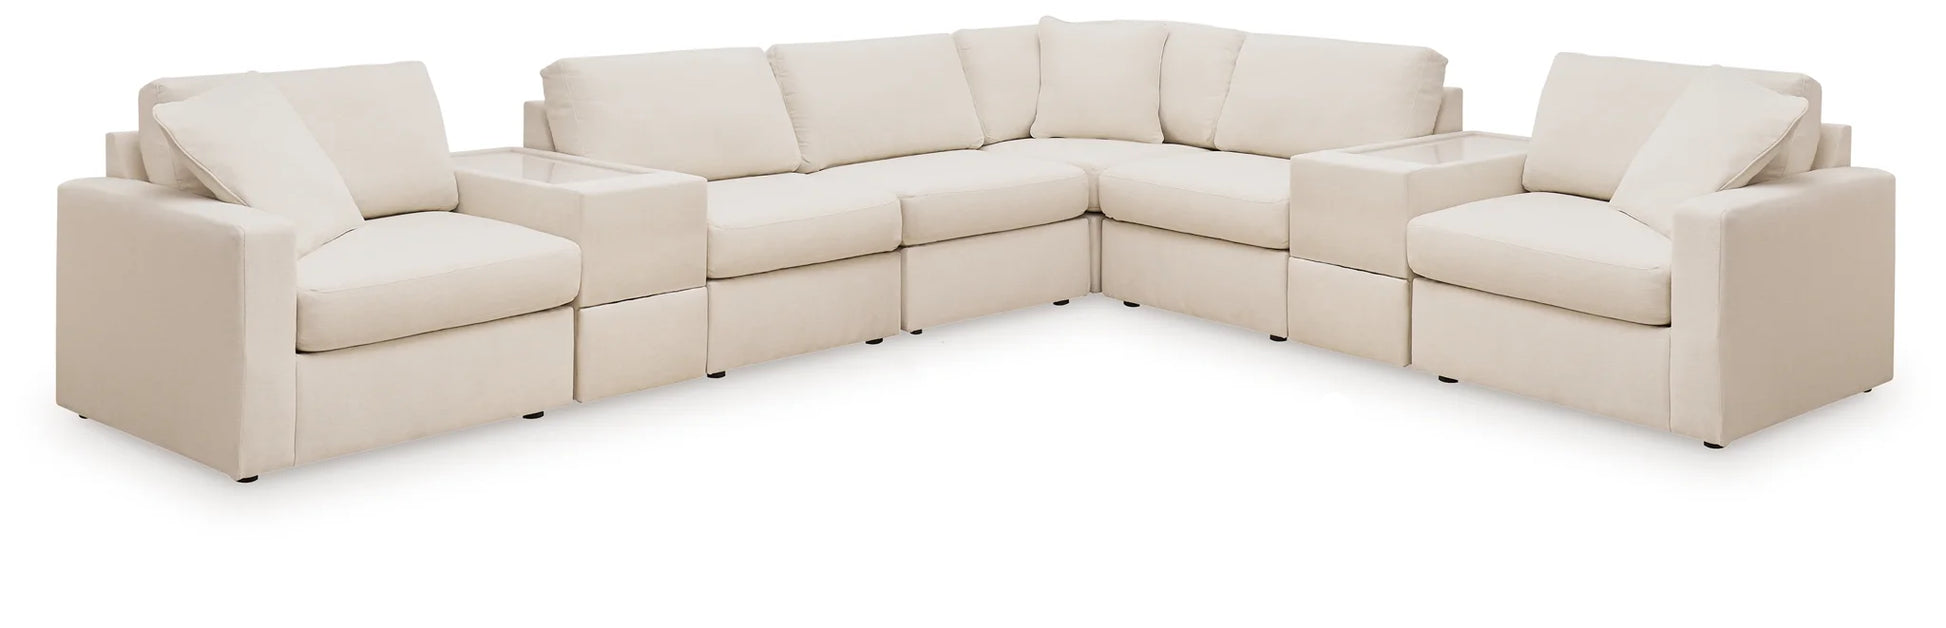 Modmax - Oyster - 8-Piece Sectional With 2 Storage Consoles